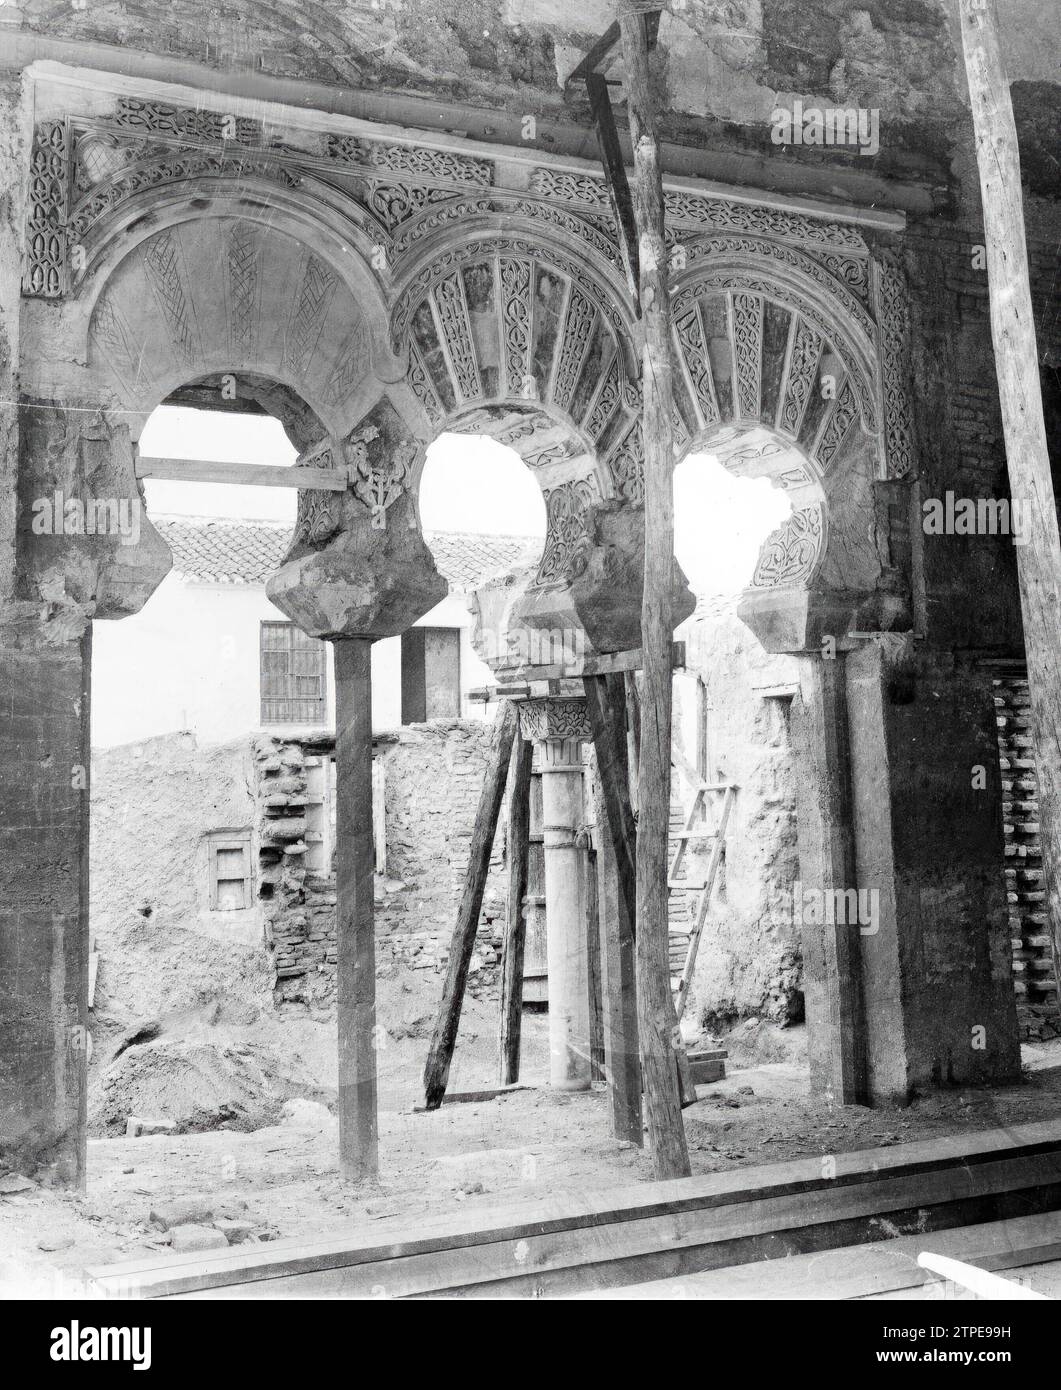 08/31/1935. Arches Discovered in the Malaga citadel, whose works the caliph will visit during his stay in the city, on the occasion of the festivities. Photo: Aguilera.-la alcazaba It is one of the most significant buildings in Malaga. It is a building from the Islamic period built on a small hill at the eastern end of the city. According to Arab Sources, it was built by Badis, King Ziri of Granada, between 1057 and 1063, although it is possible that an earlier building was erected in that same place. The work was carried out with ashlars of nummulite limestone, extracted from quarries close t Stock Photo